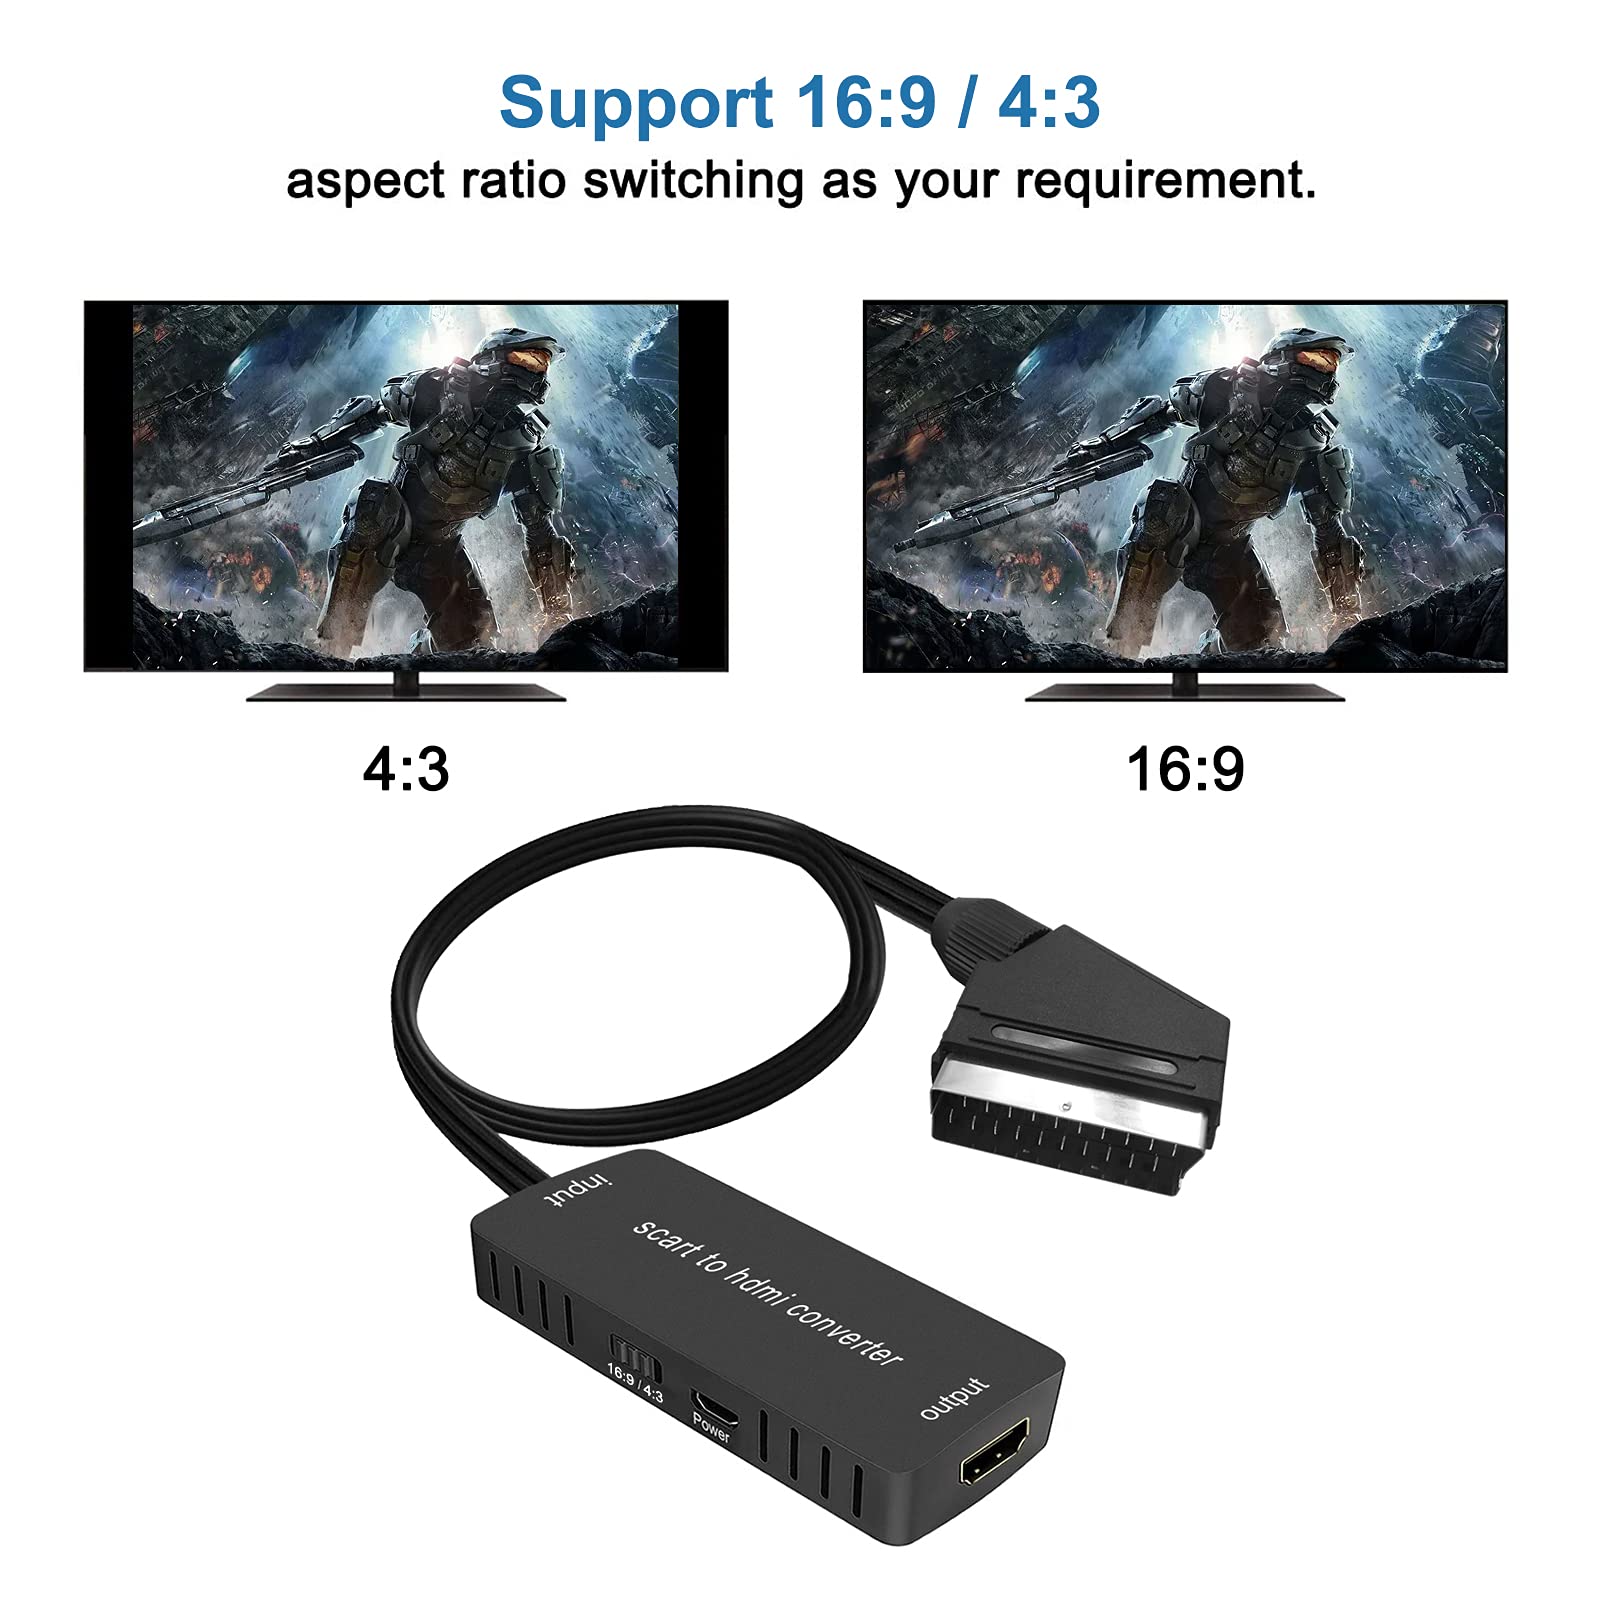 Scart to HDMI Converter, Wrugste Scart input HDMI output 16:9/4:3 Video Audio Converter Adapter with HDMI cable for HDTV Monitor Projector STB VHS Xbox Sky Blu-ray DVD Player